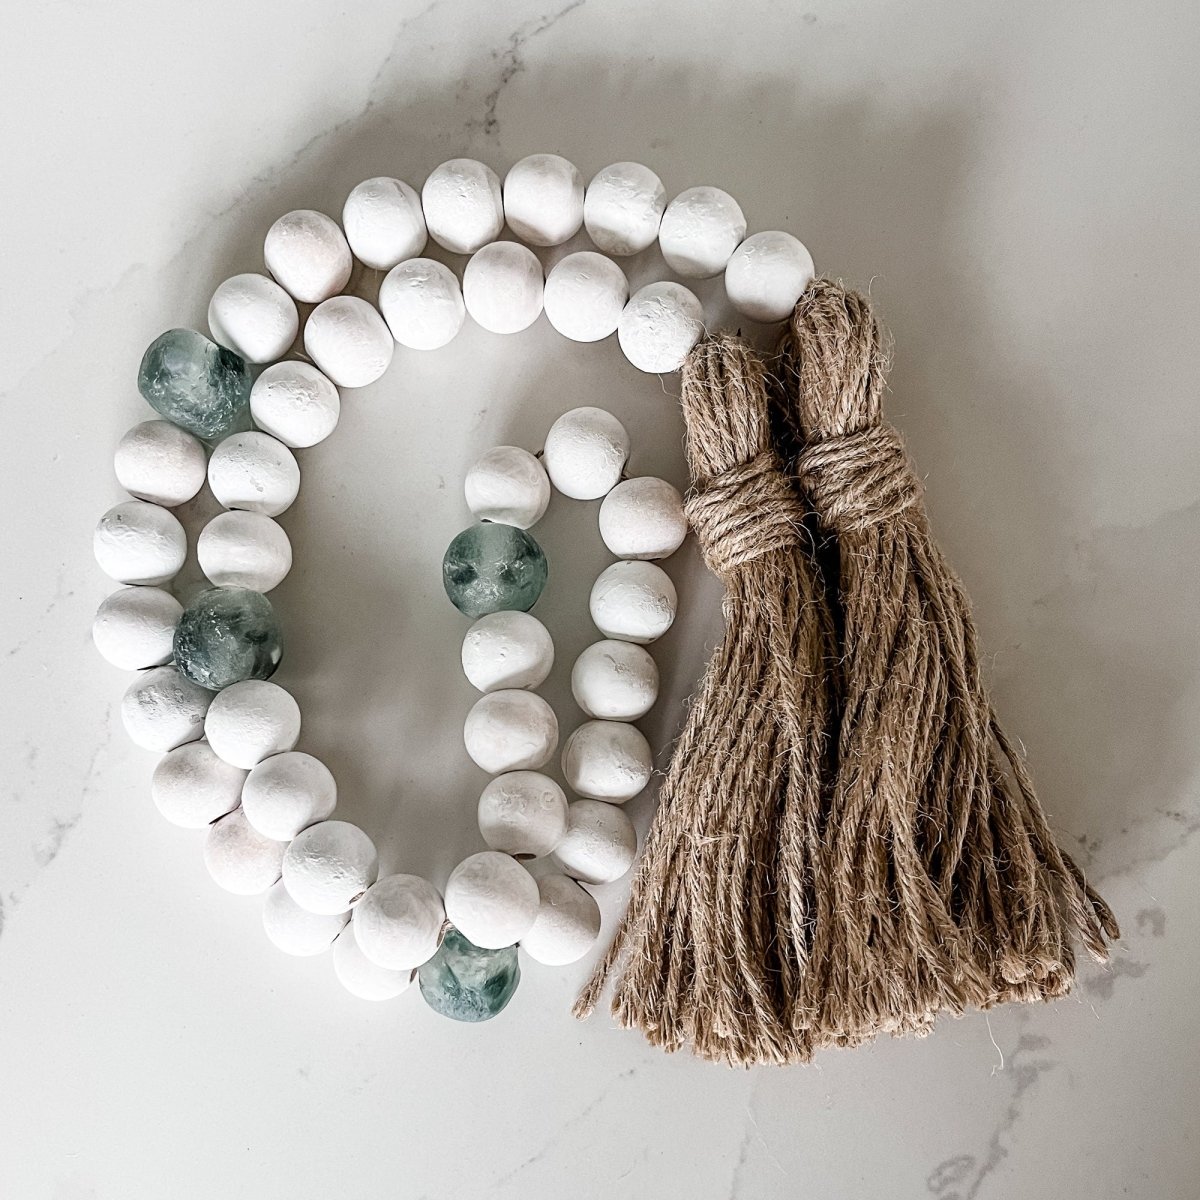 Load image into Gallery viewer, Whitewashed Wood Bead Garland with Jumbo Gray Recycled Glass Beads - sonder and wolf
